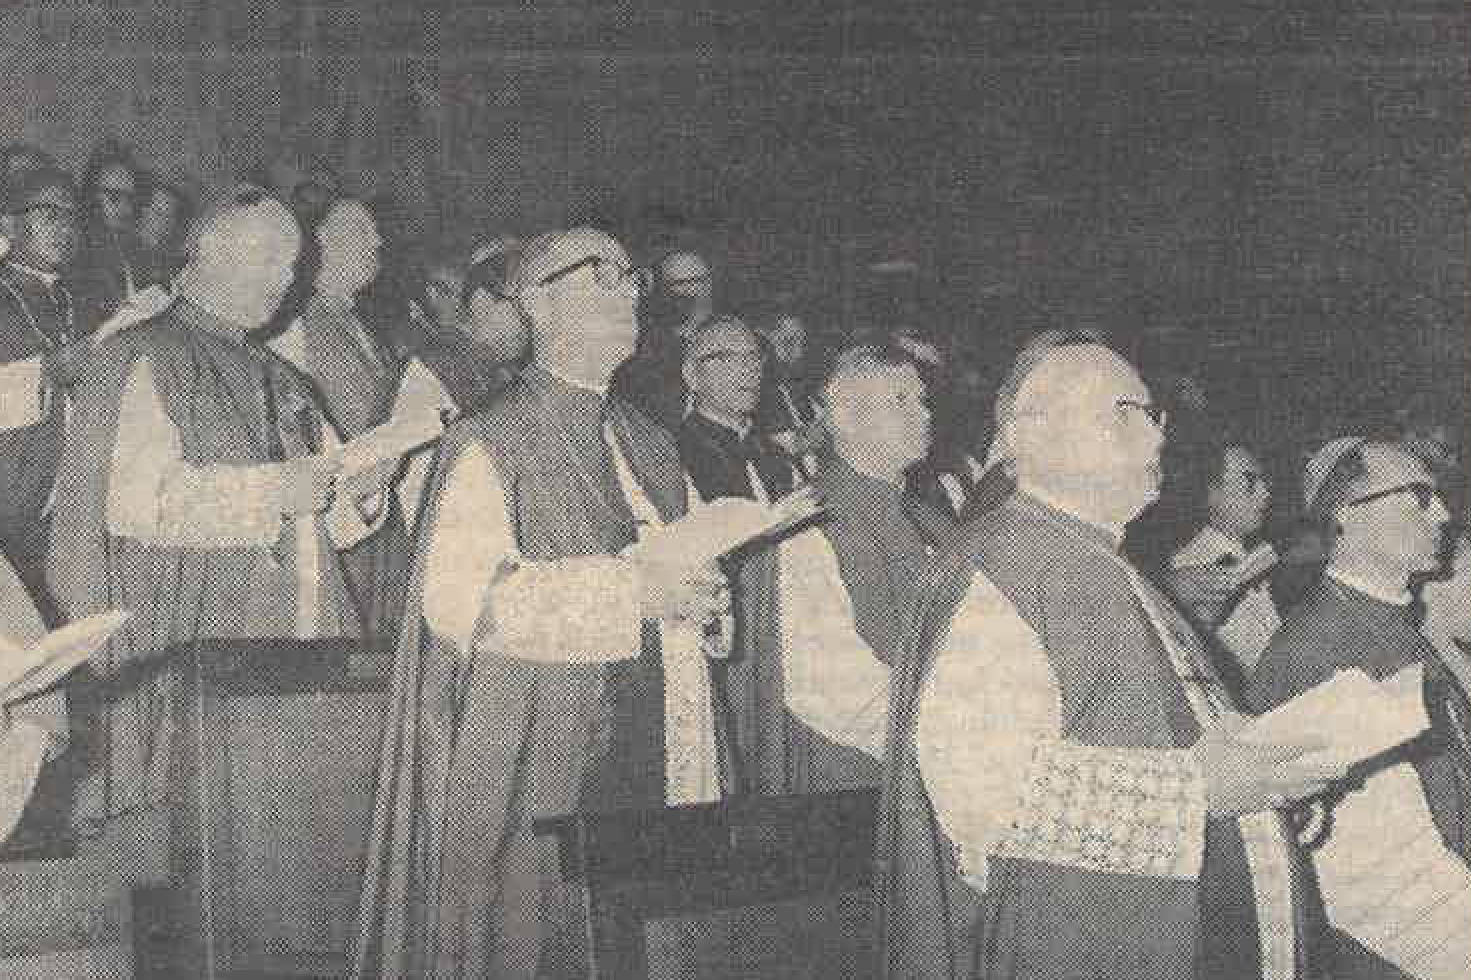 Archbishop Raymond Hunthausen (left, second row) at Vatican II: transforming the church. SW File Photo